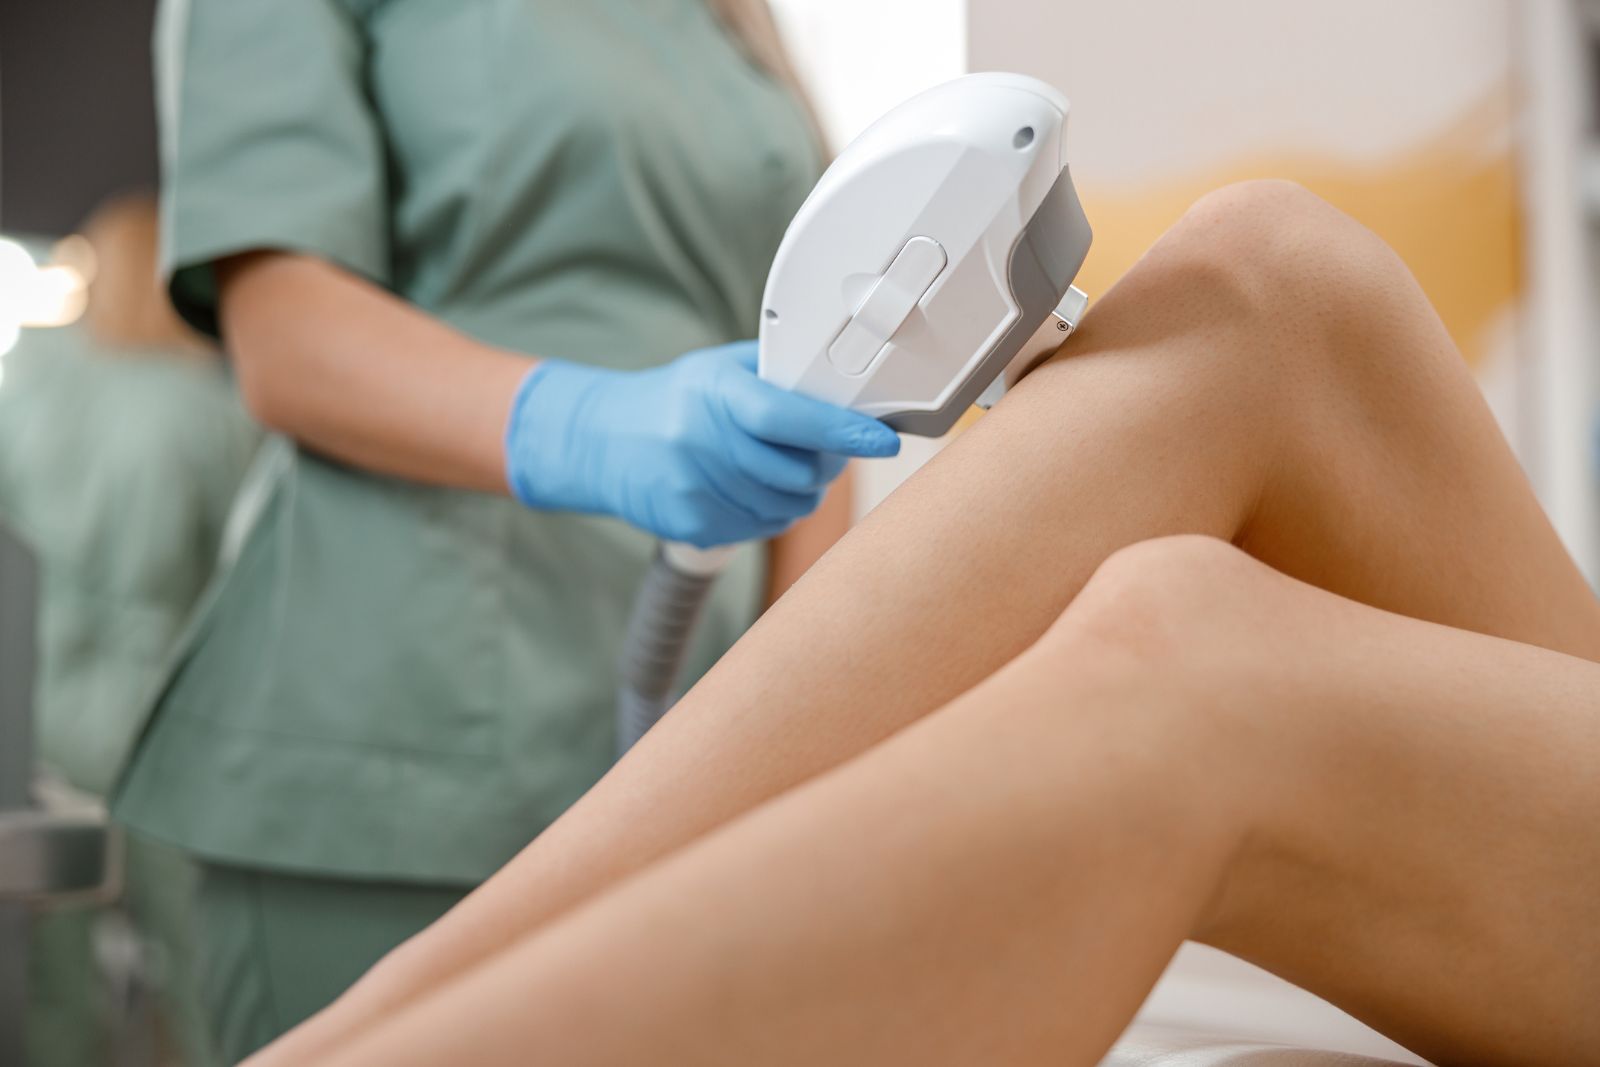 A woman's leg being treated with a laser.